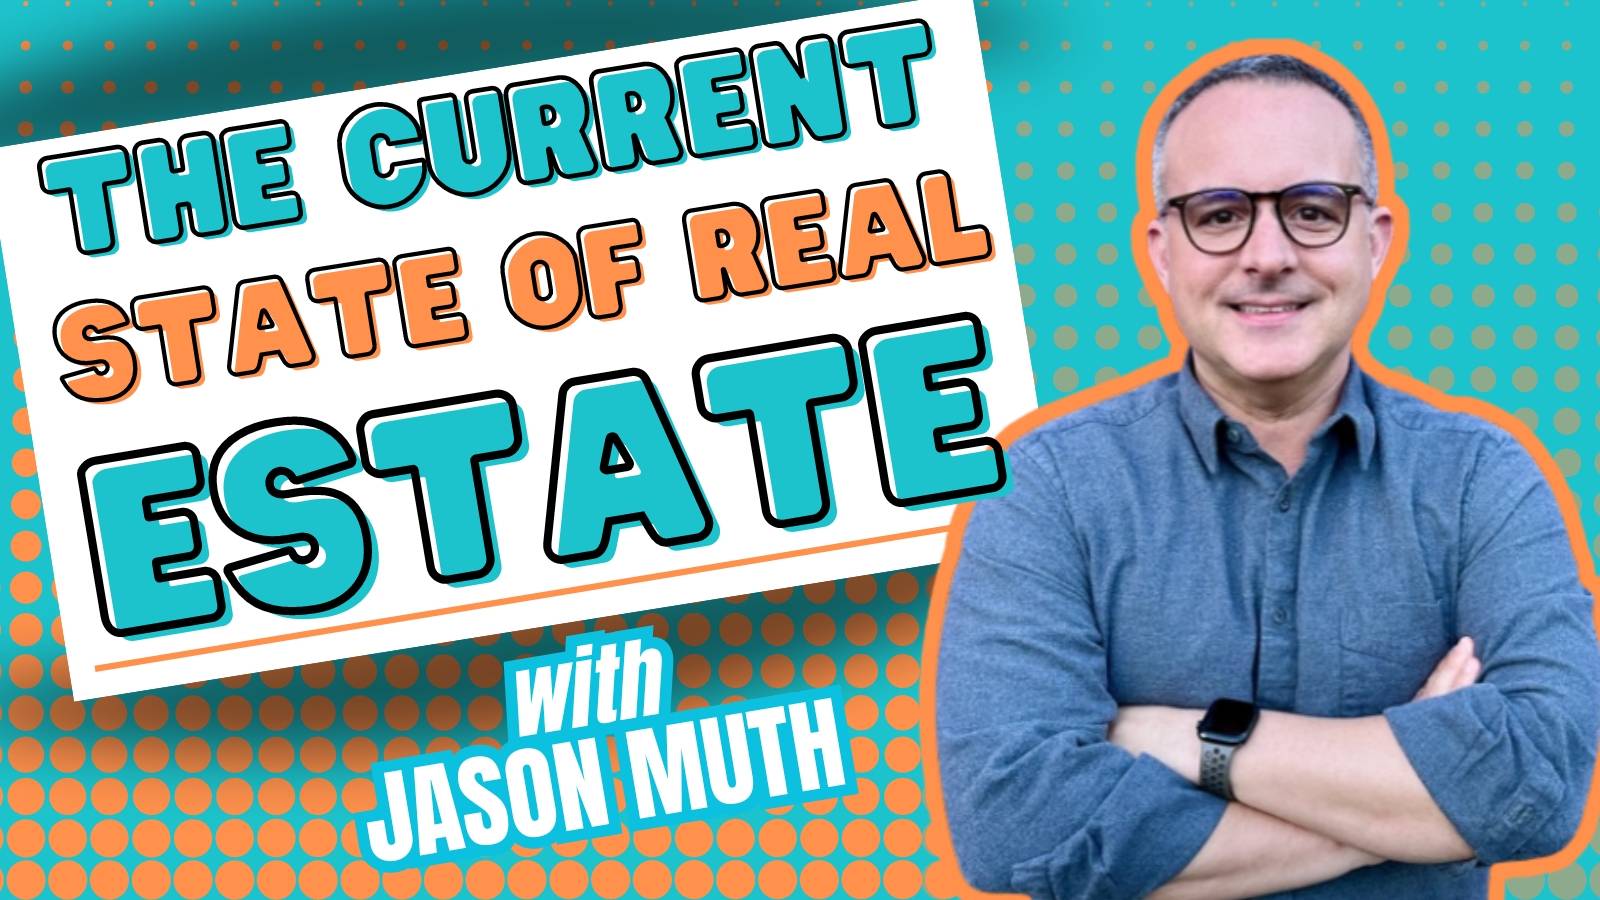 The Current State of Real Estate with Jason Muth